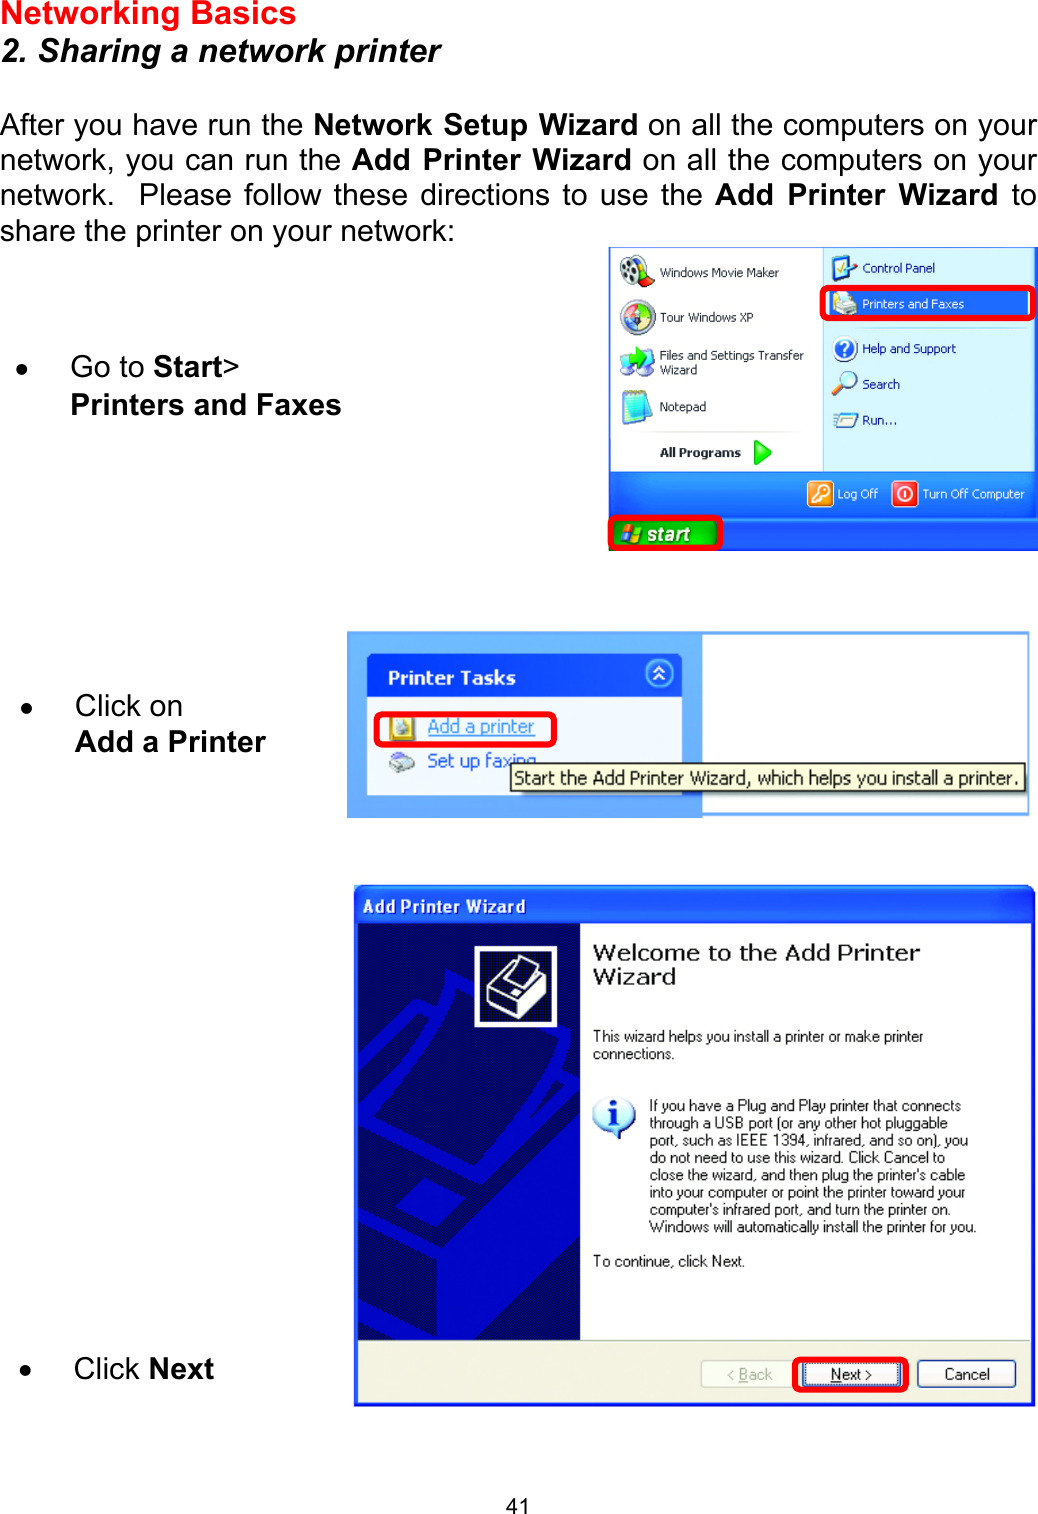  41Networking Basics  2. Sharing a network printer  After you have run the Network Setup Wizard on all the computers on your network, you can run the Add Printer Wizard on all the computers on your network.  Please follow these directions to use the Add Printer Wizard to share the printer on your network:          •  Go to Start&gt; Printers and Faxes •  Click on  Add a Printer •  Click Next 